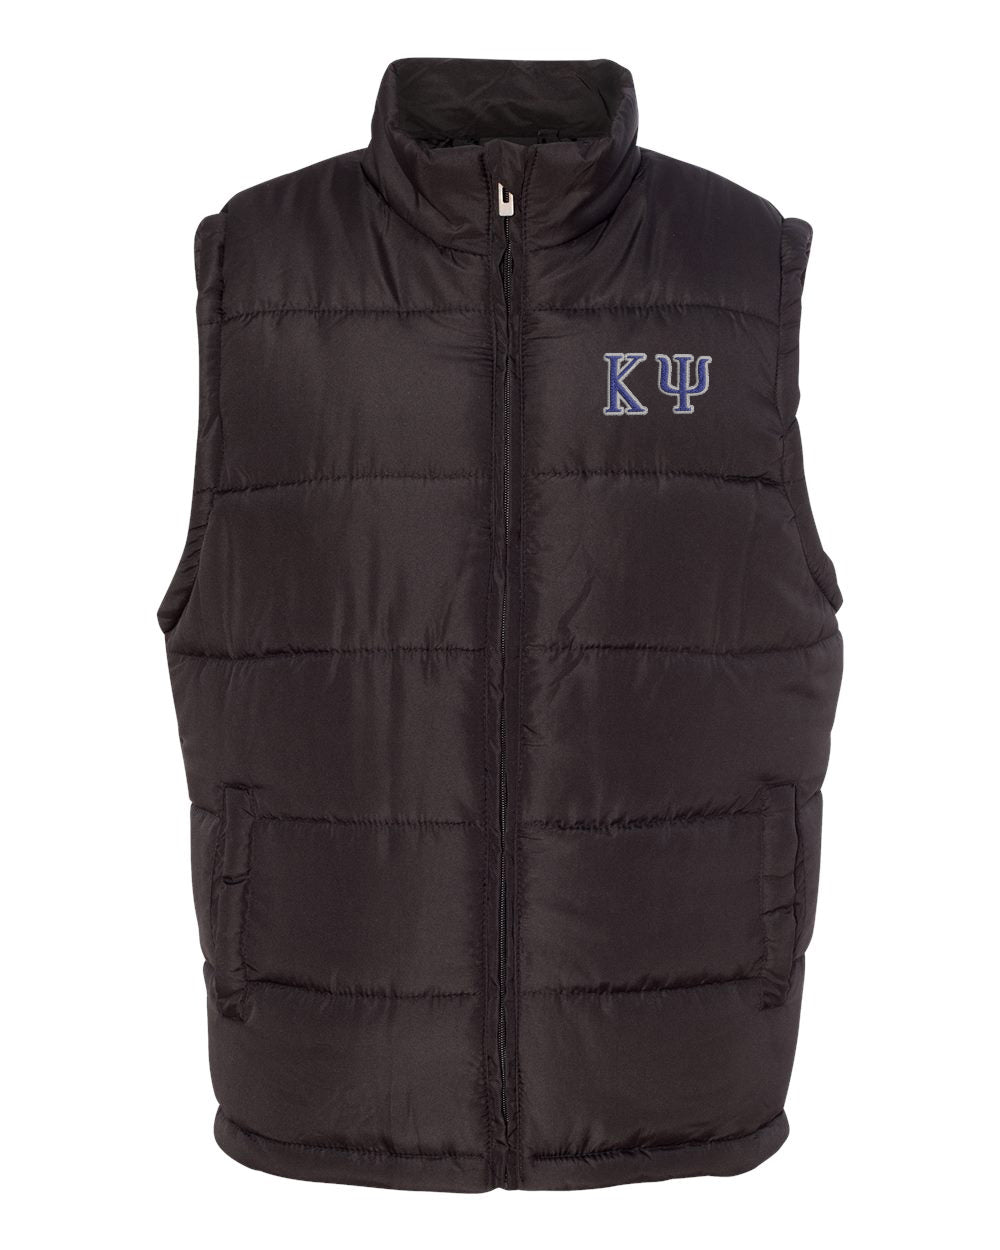 Kappa Psi Embroidered Puffer Vest